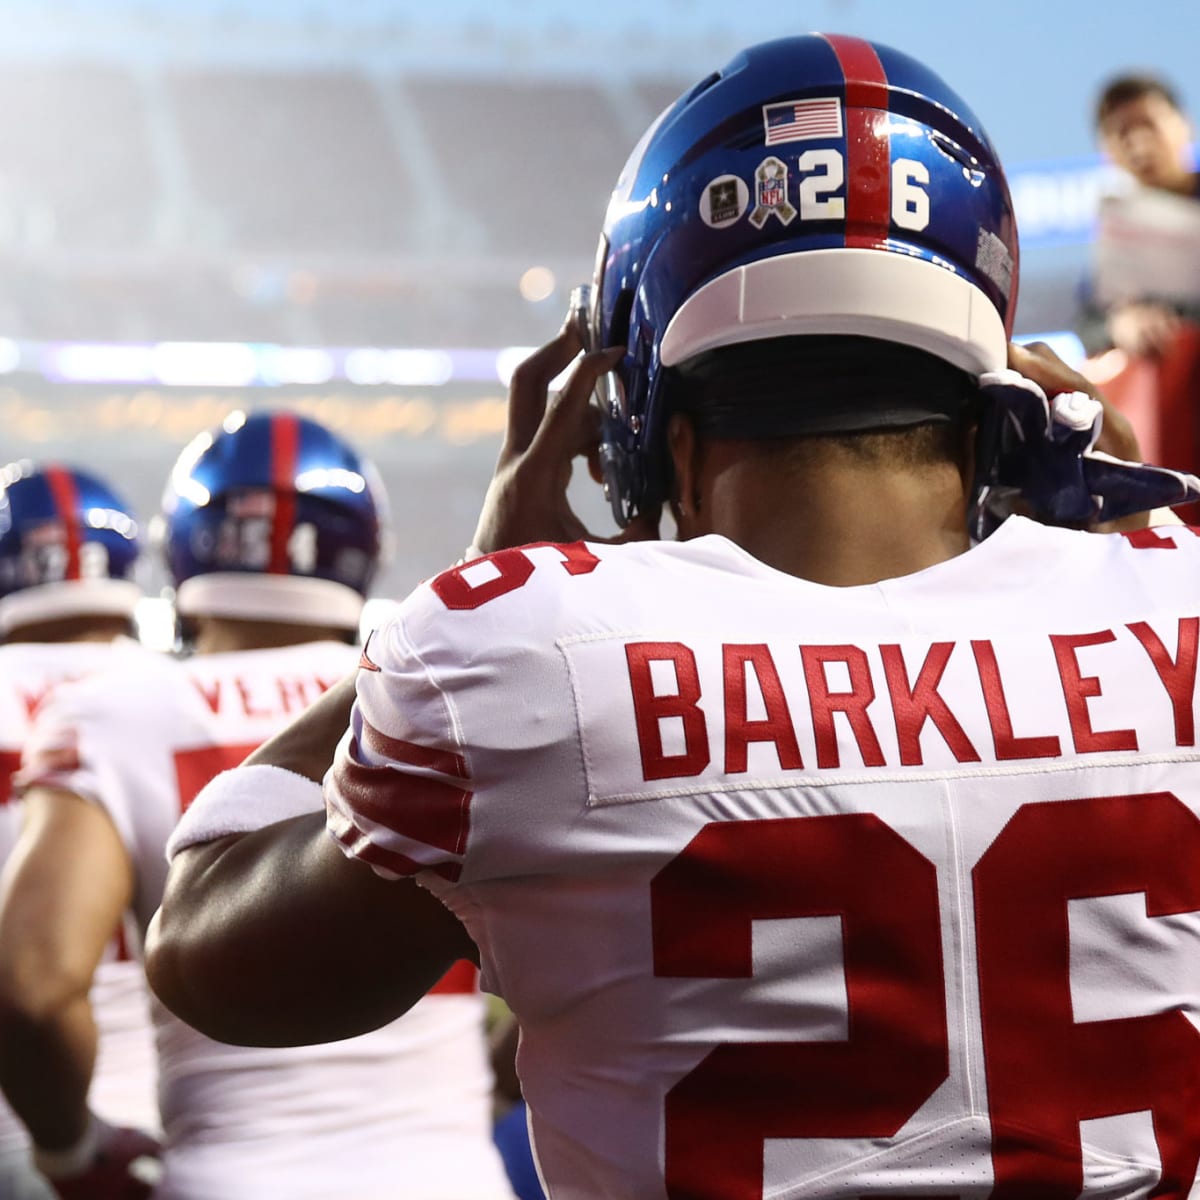 Saquon Barkley refuses to play as the New York Giants in Madden